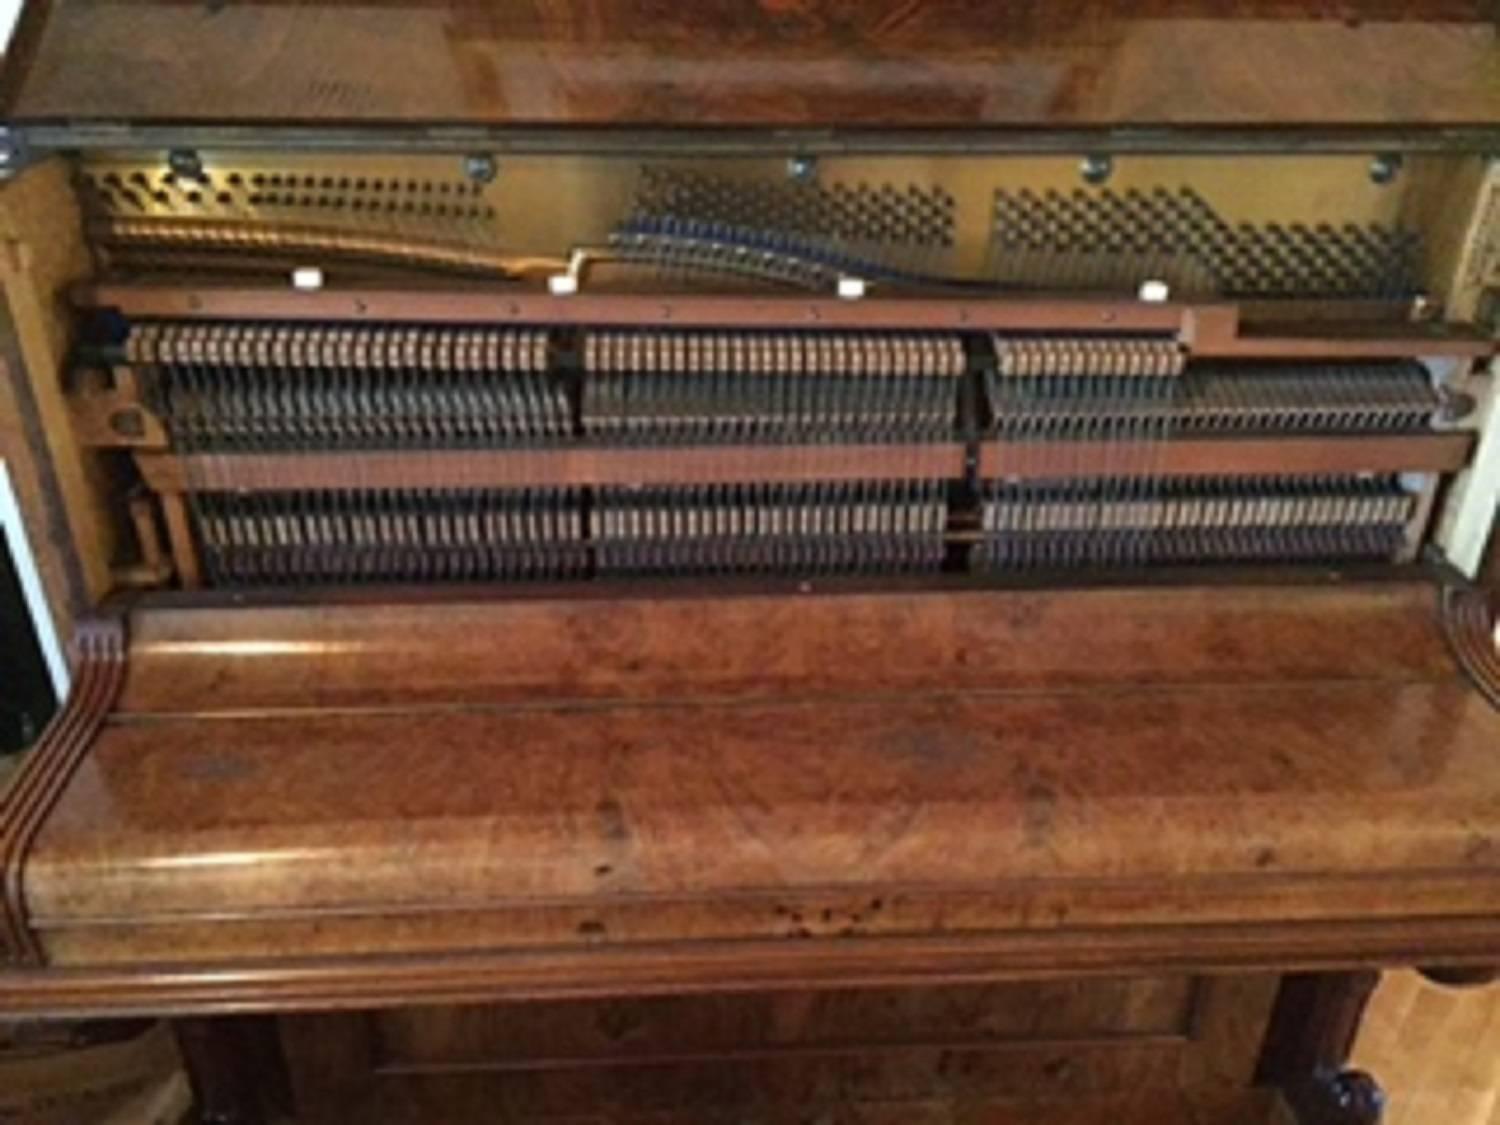 Unique upright piano H. Wolfframm with a metal plate made in Dresden Germany in the late 19th century. It is made of maple bird wood that has minor cosmetic damage on the lid.
When tuned the piano plays well and has a very nice tone and is